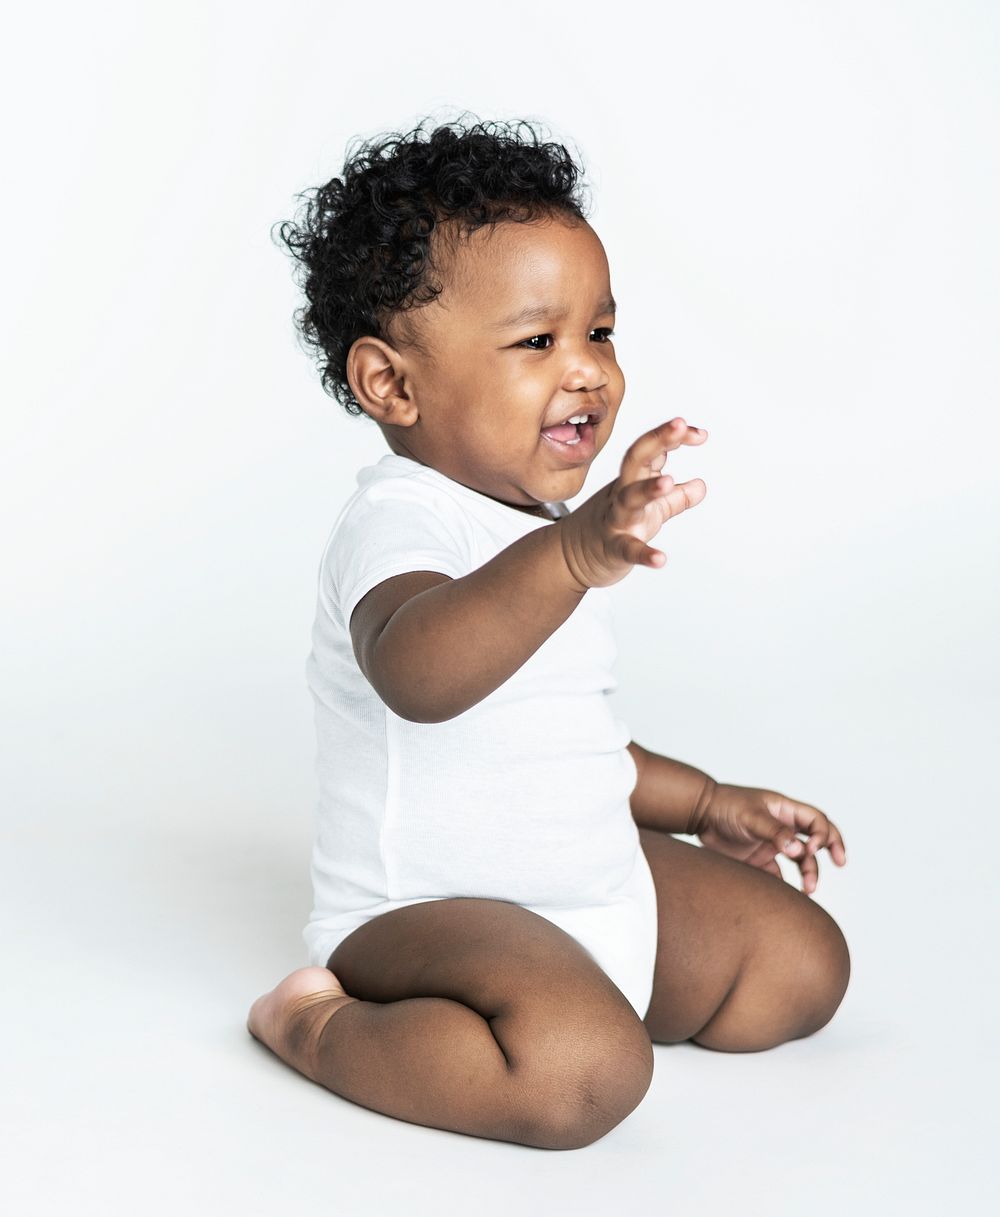 Cheerful baby in a studio